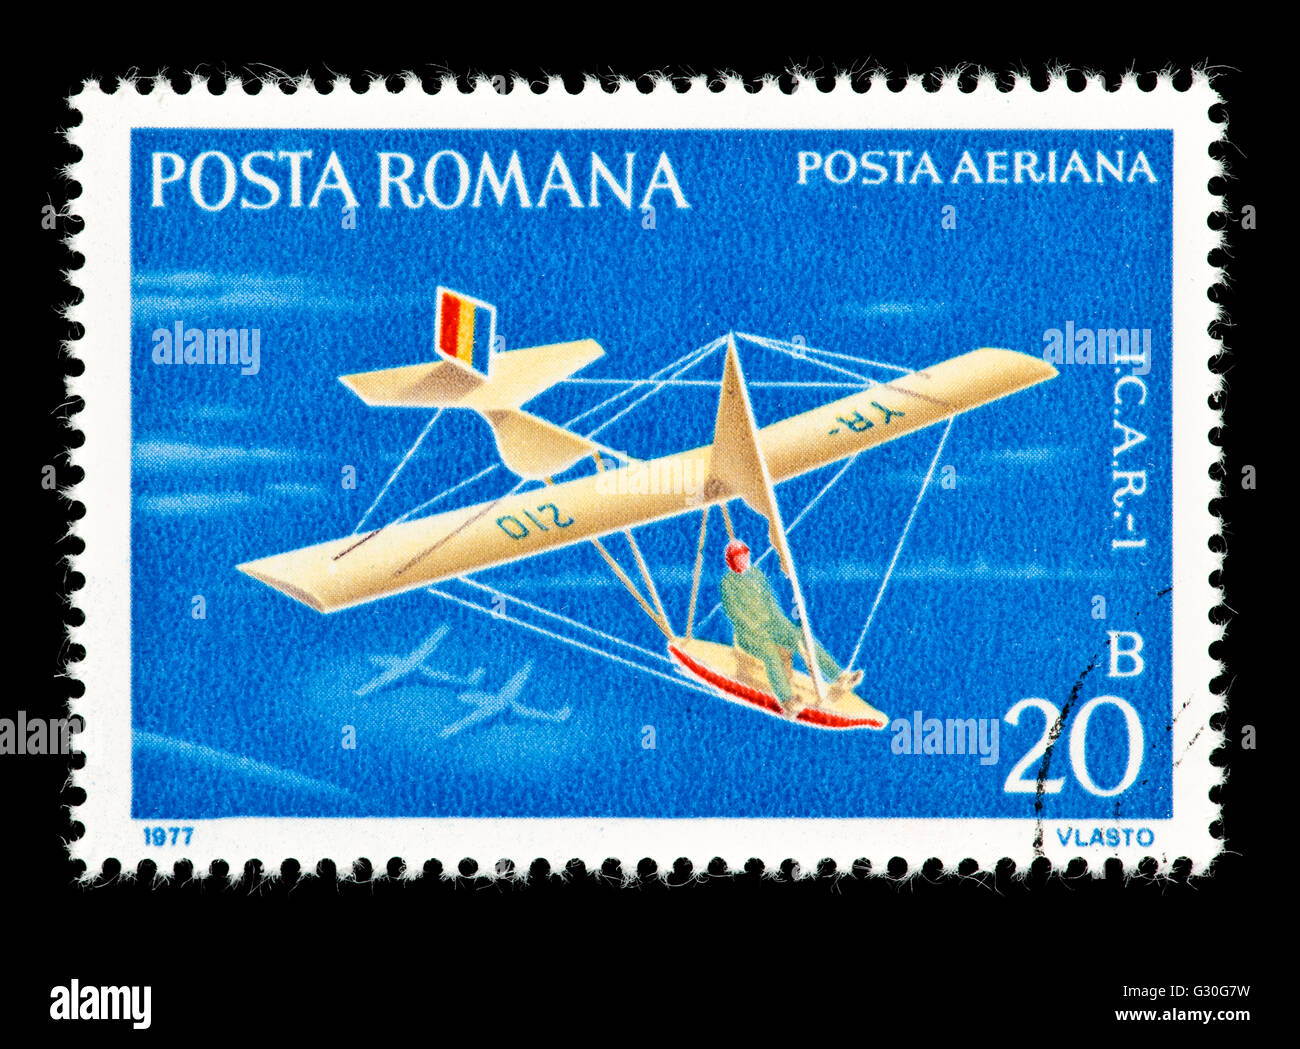 Postage stamp from Romania depicting an I.C.A.R. - 1 glider. Stock Photo